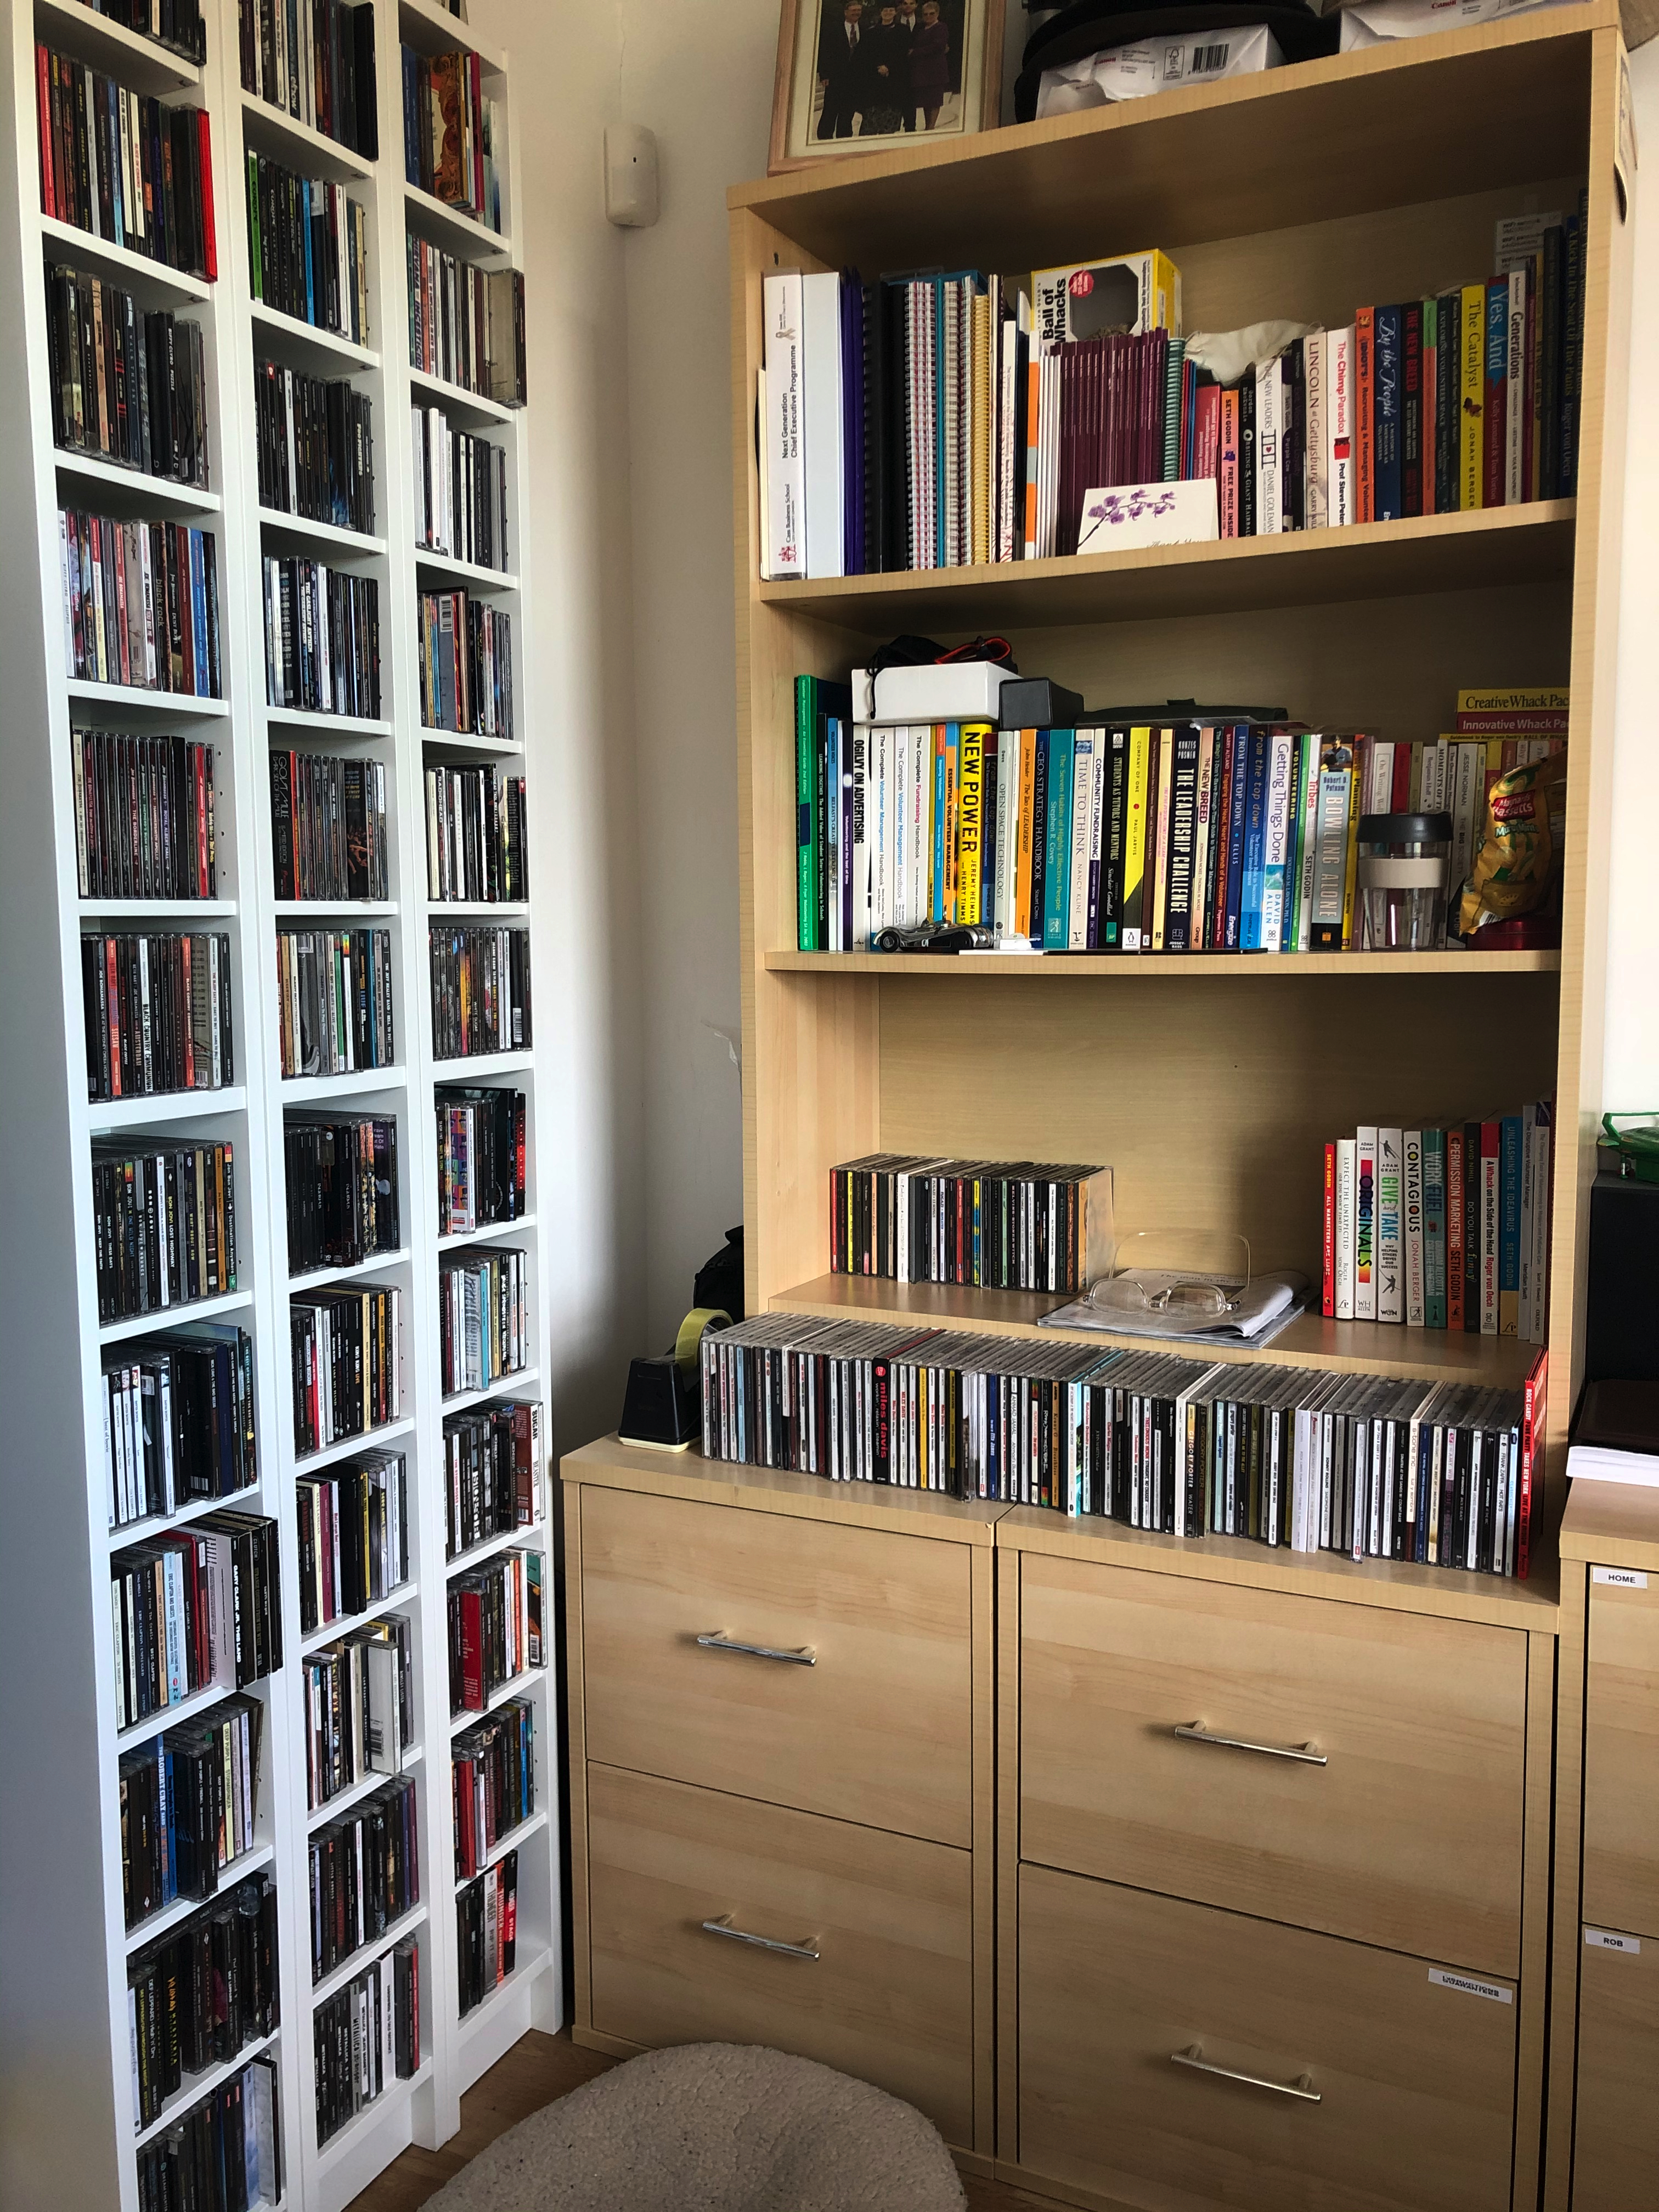 Office books and filing share space with my CDs